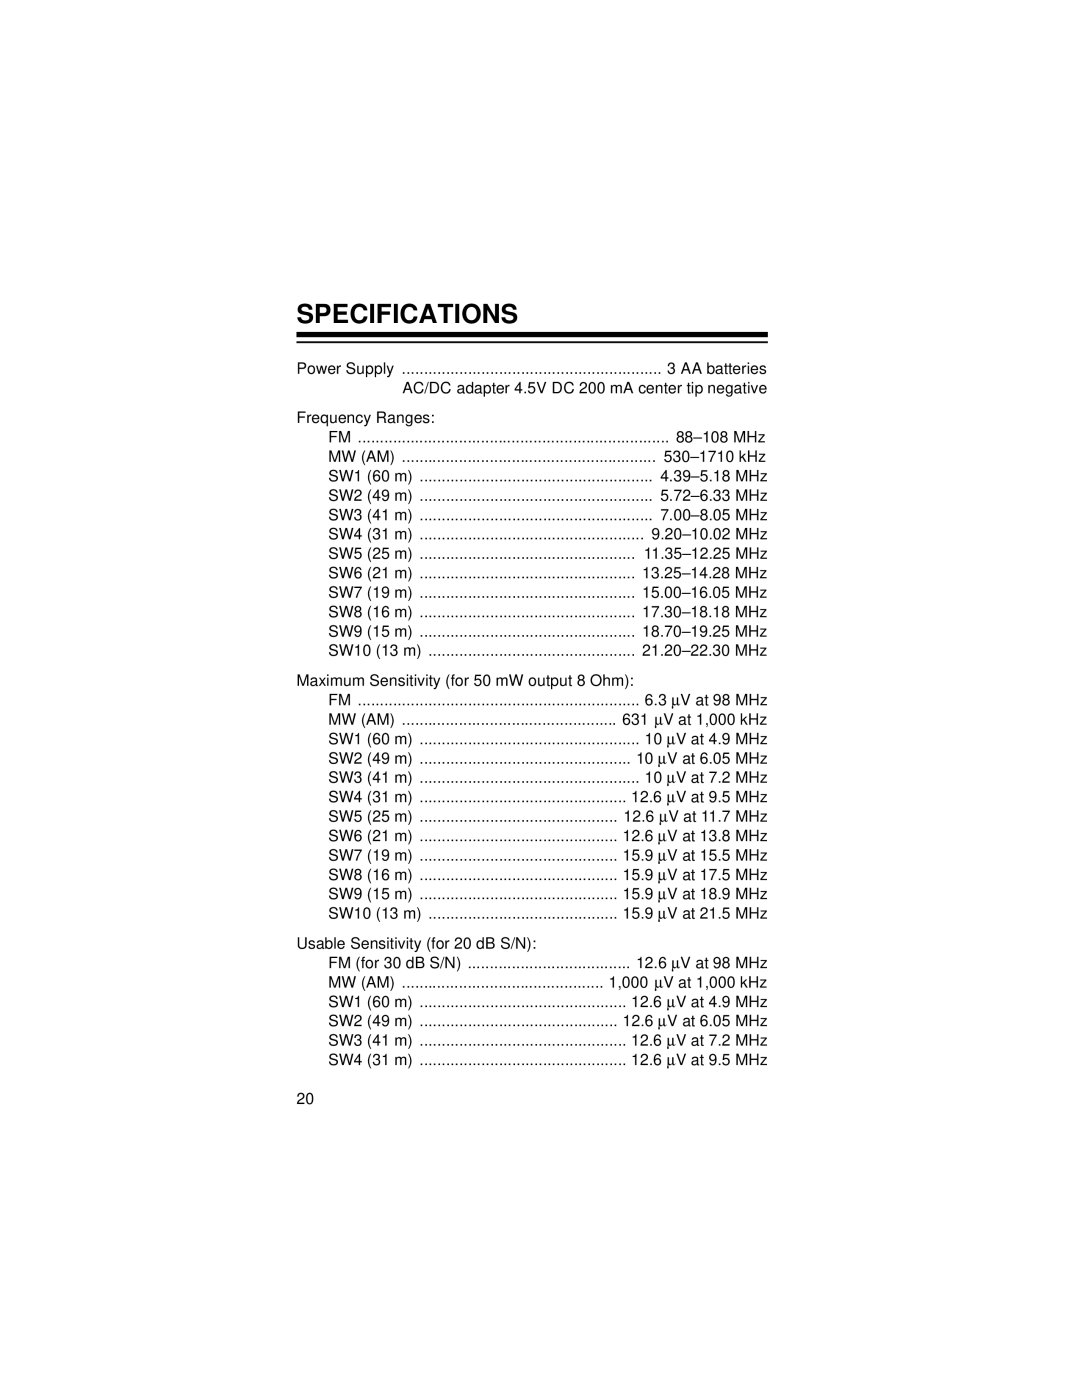 Radio Shack DX-397 owner manual Specifications 